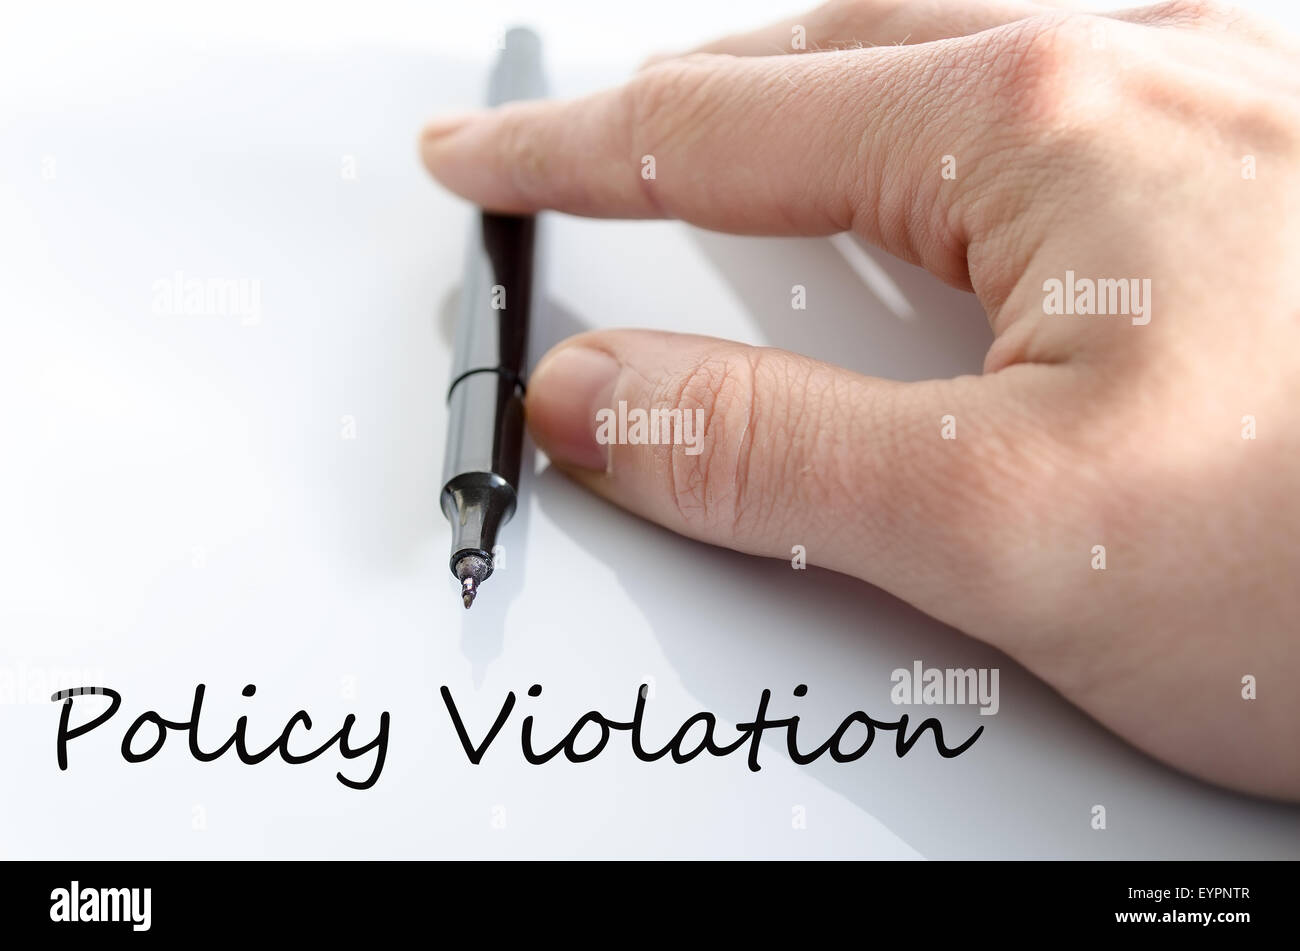 Policy Violation hand concept isolated over white background Stock Photo